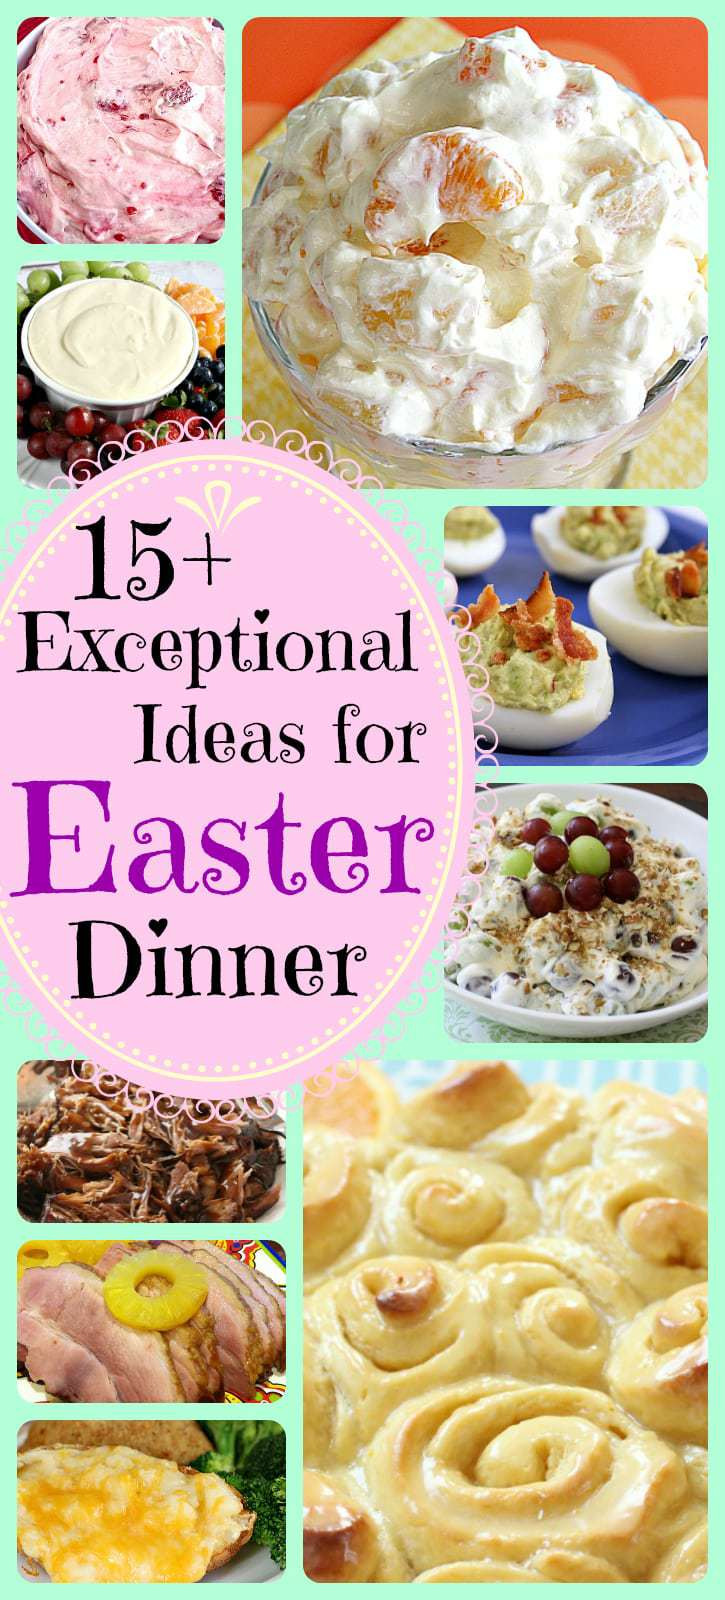 Easy Easter Recipes For Dinner
 EASY & DELICIOUS EASTER DINNER RECIPES Butter with a